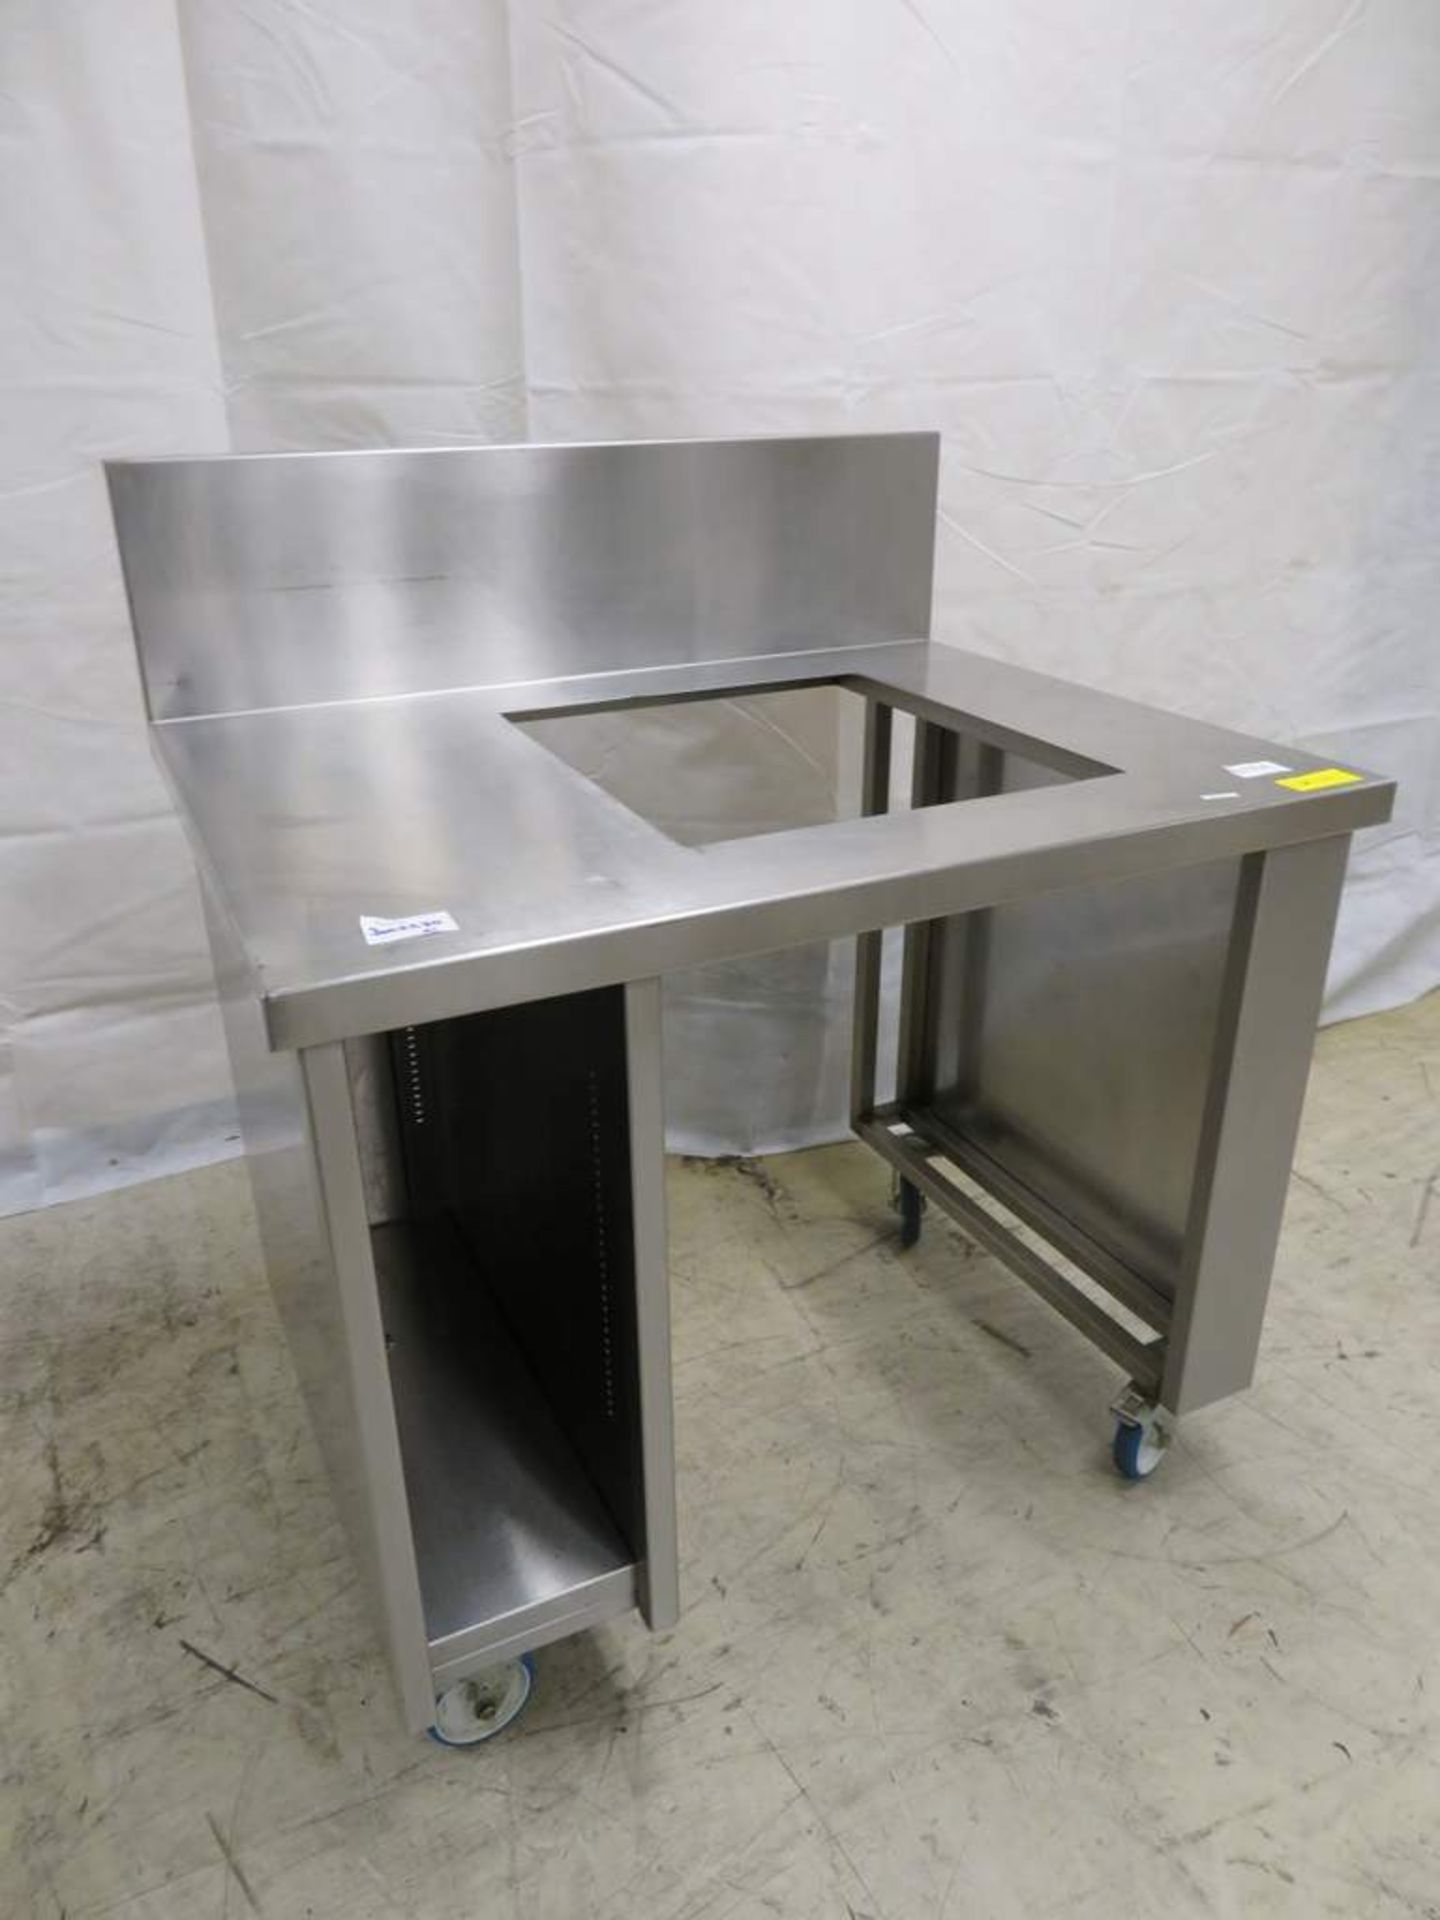 Stainless Steel Preperation Table - Image 3 of 6